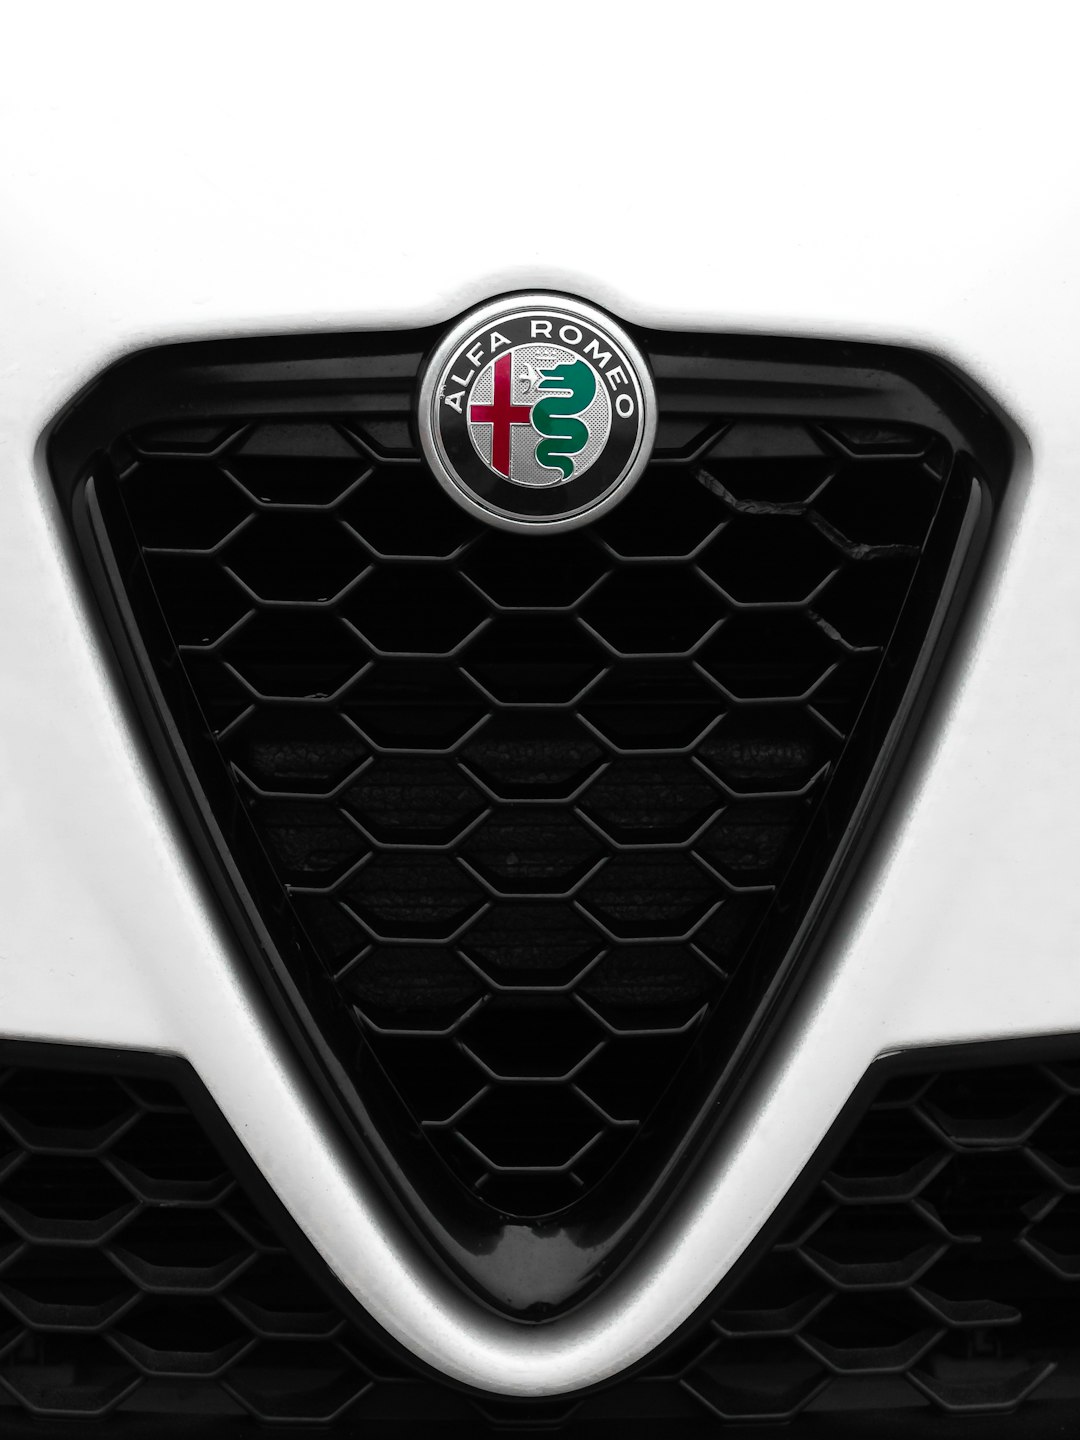 Alfa Romeo is an Italian luxury car manufacturer known for its sleek designs and sporty performance.